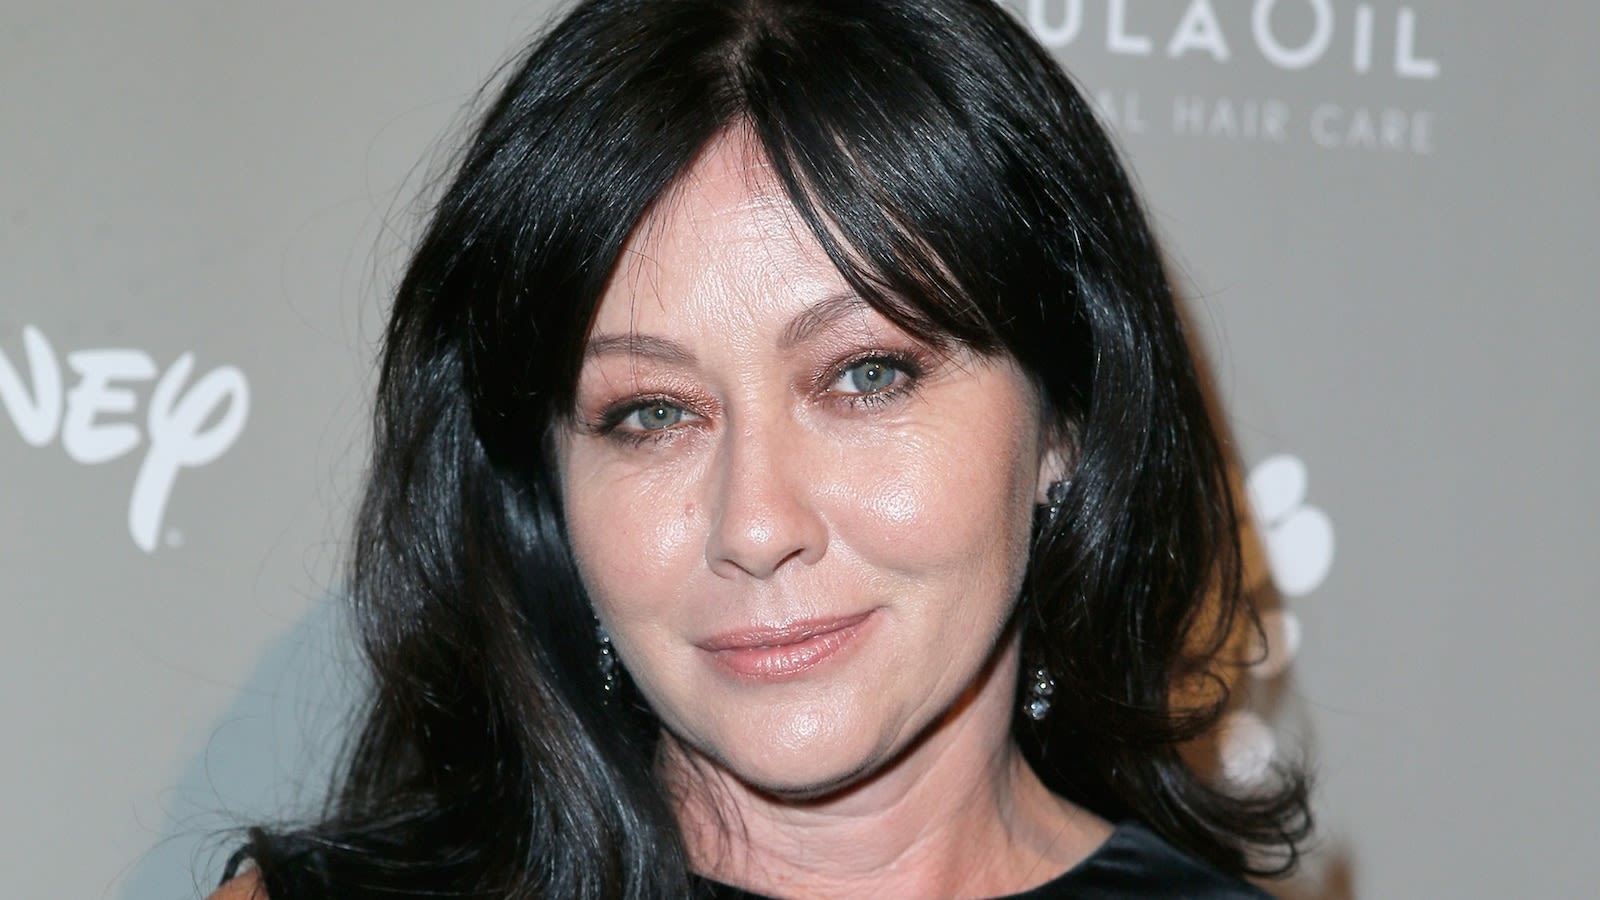 Hollywood pays tribute to Shannen Doherty: 'She was a force of nature'